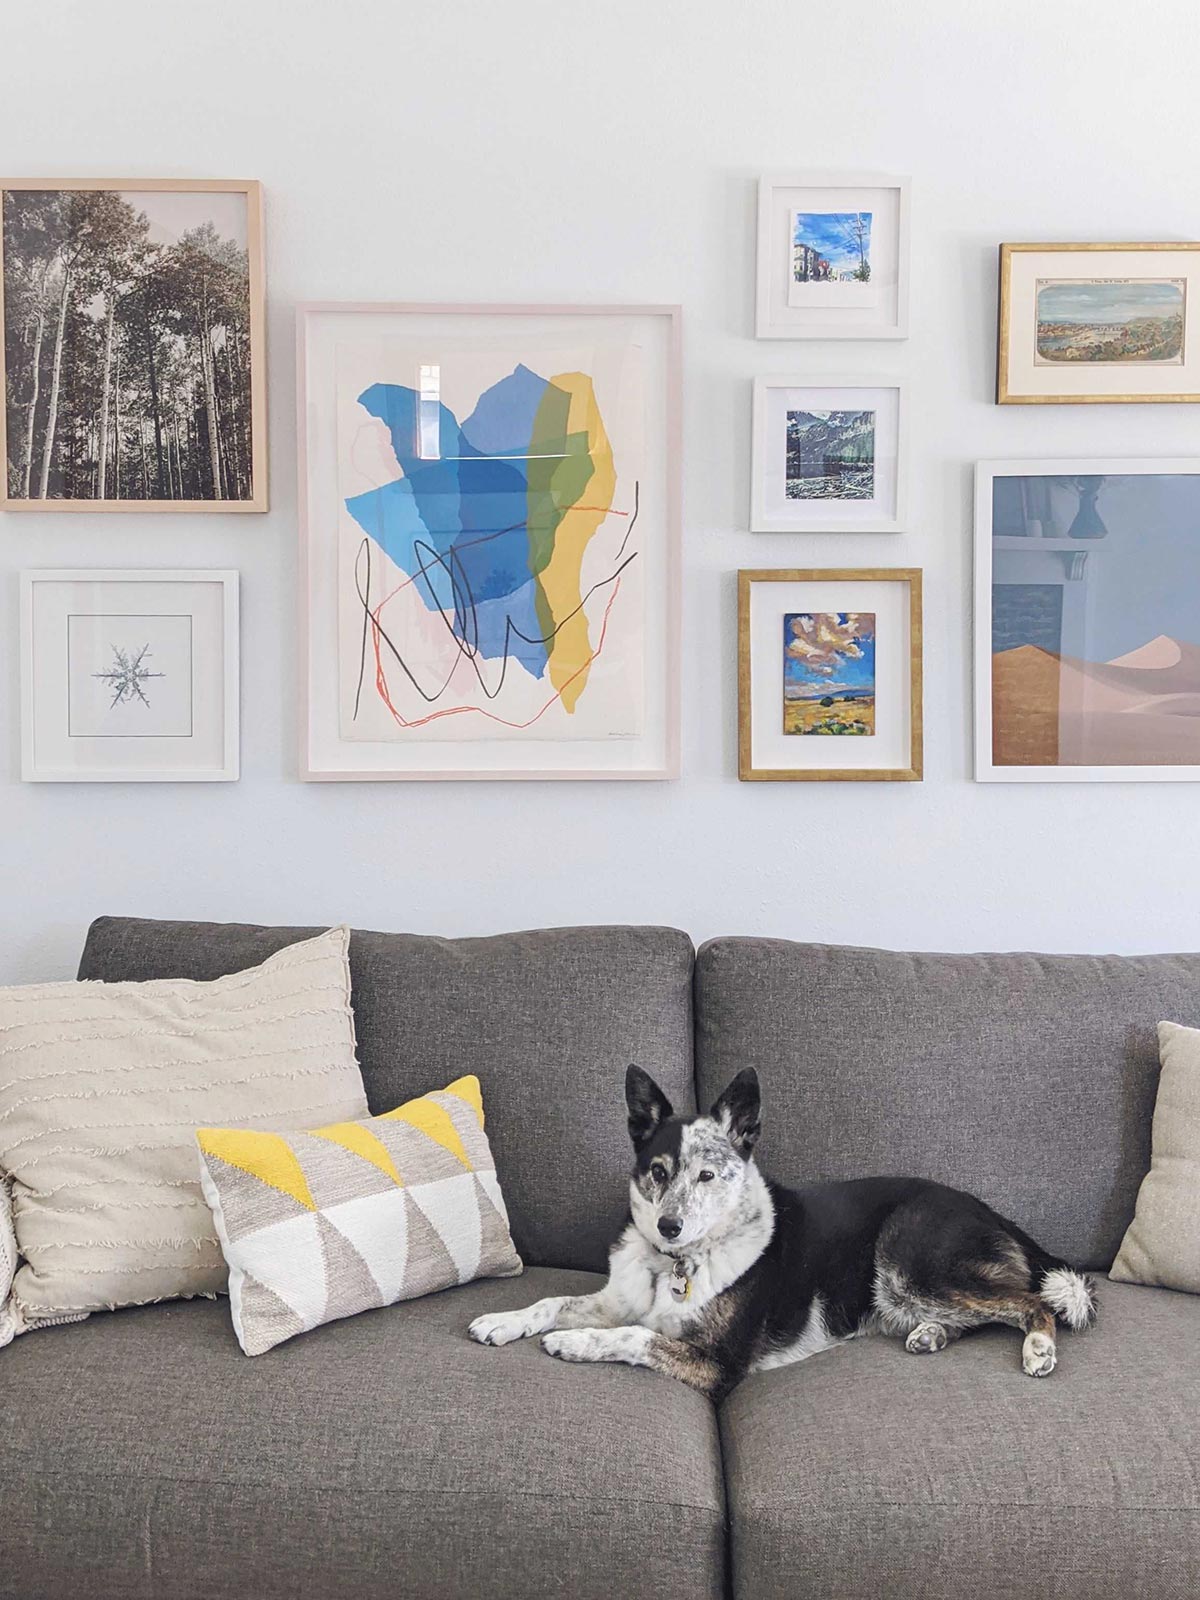 Gallery wall created with Artifact Uprising Gallery frames of different sizes above a grey couch with a blue heeler laying on it